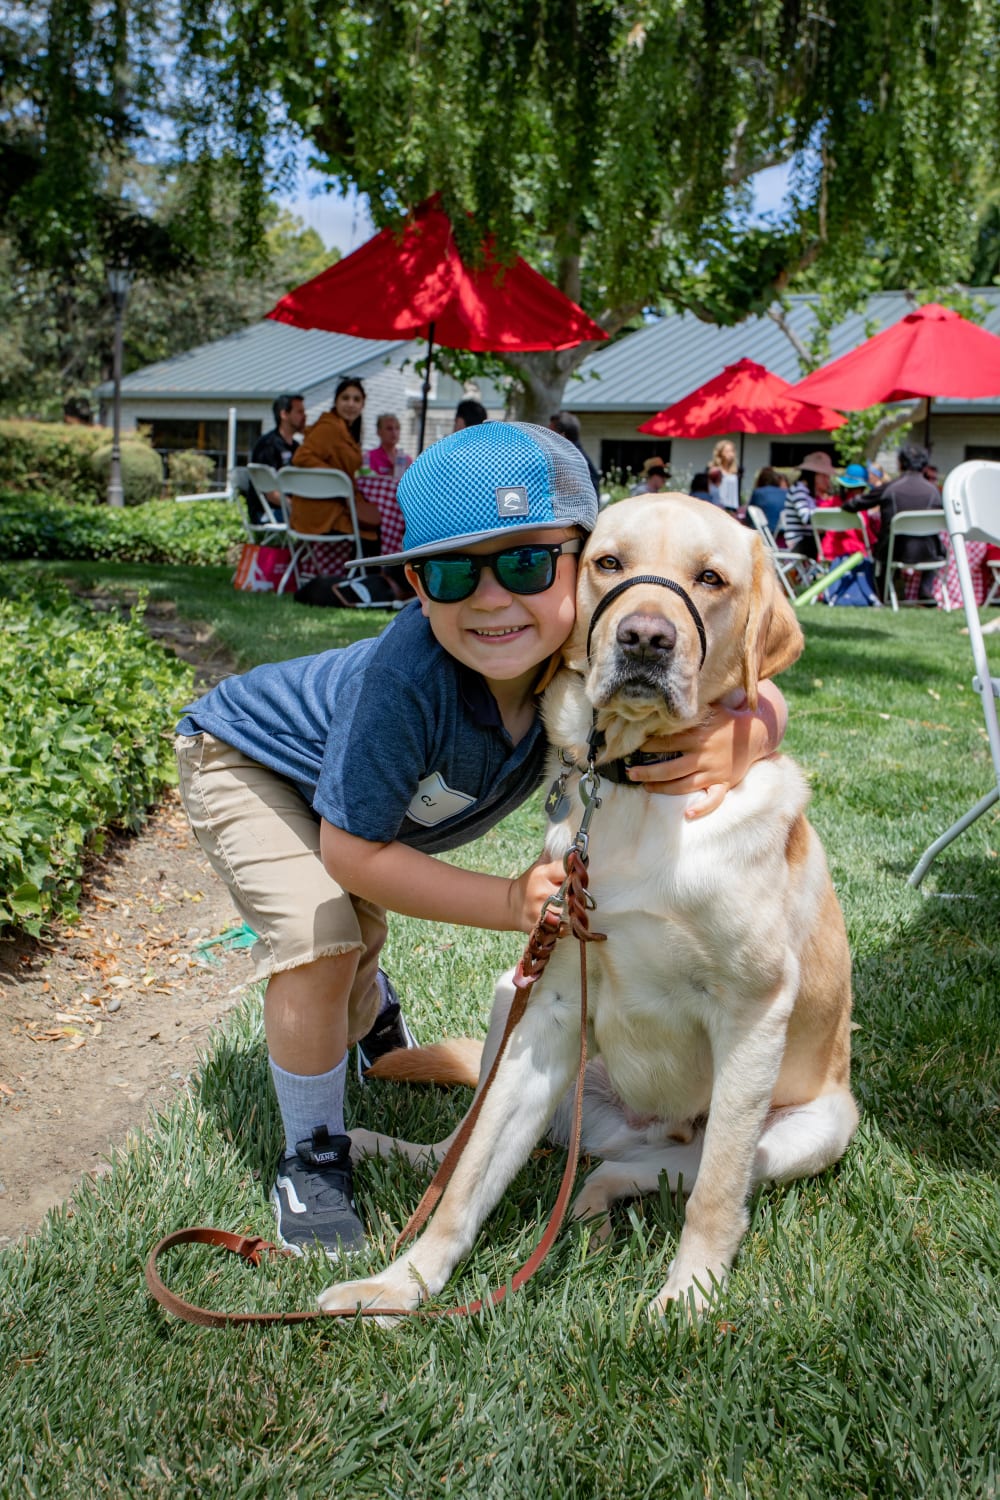 CJ & K9 Buddy, Benton. Benton was in training to become a guide dog but decided that he was a better fit to be CJ's bff. K9 Buddies are matched to children & young adults who are blind or visually impaired. A dog can contribute to heightened sensory development and greater self-esteem.